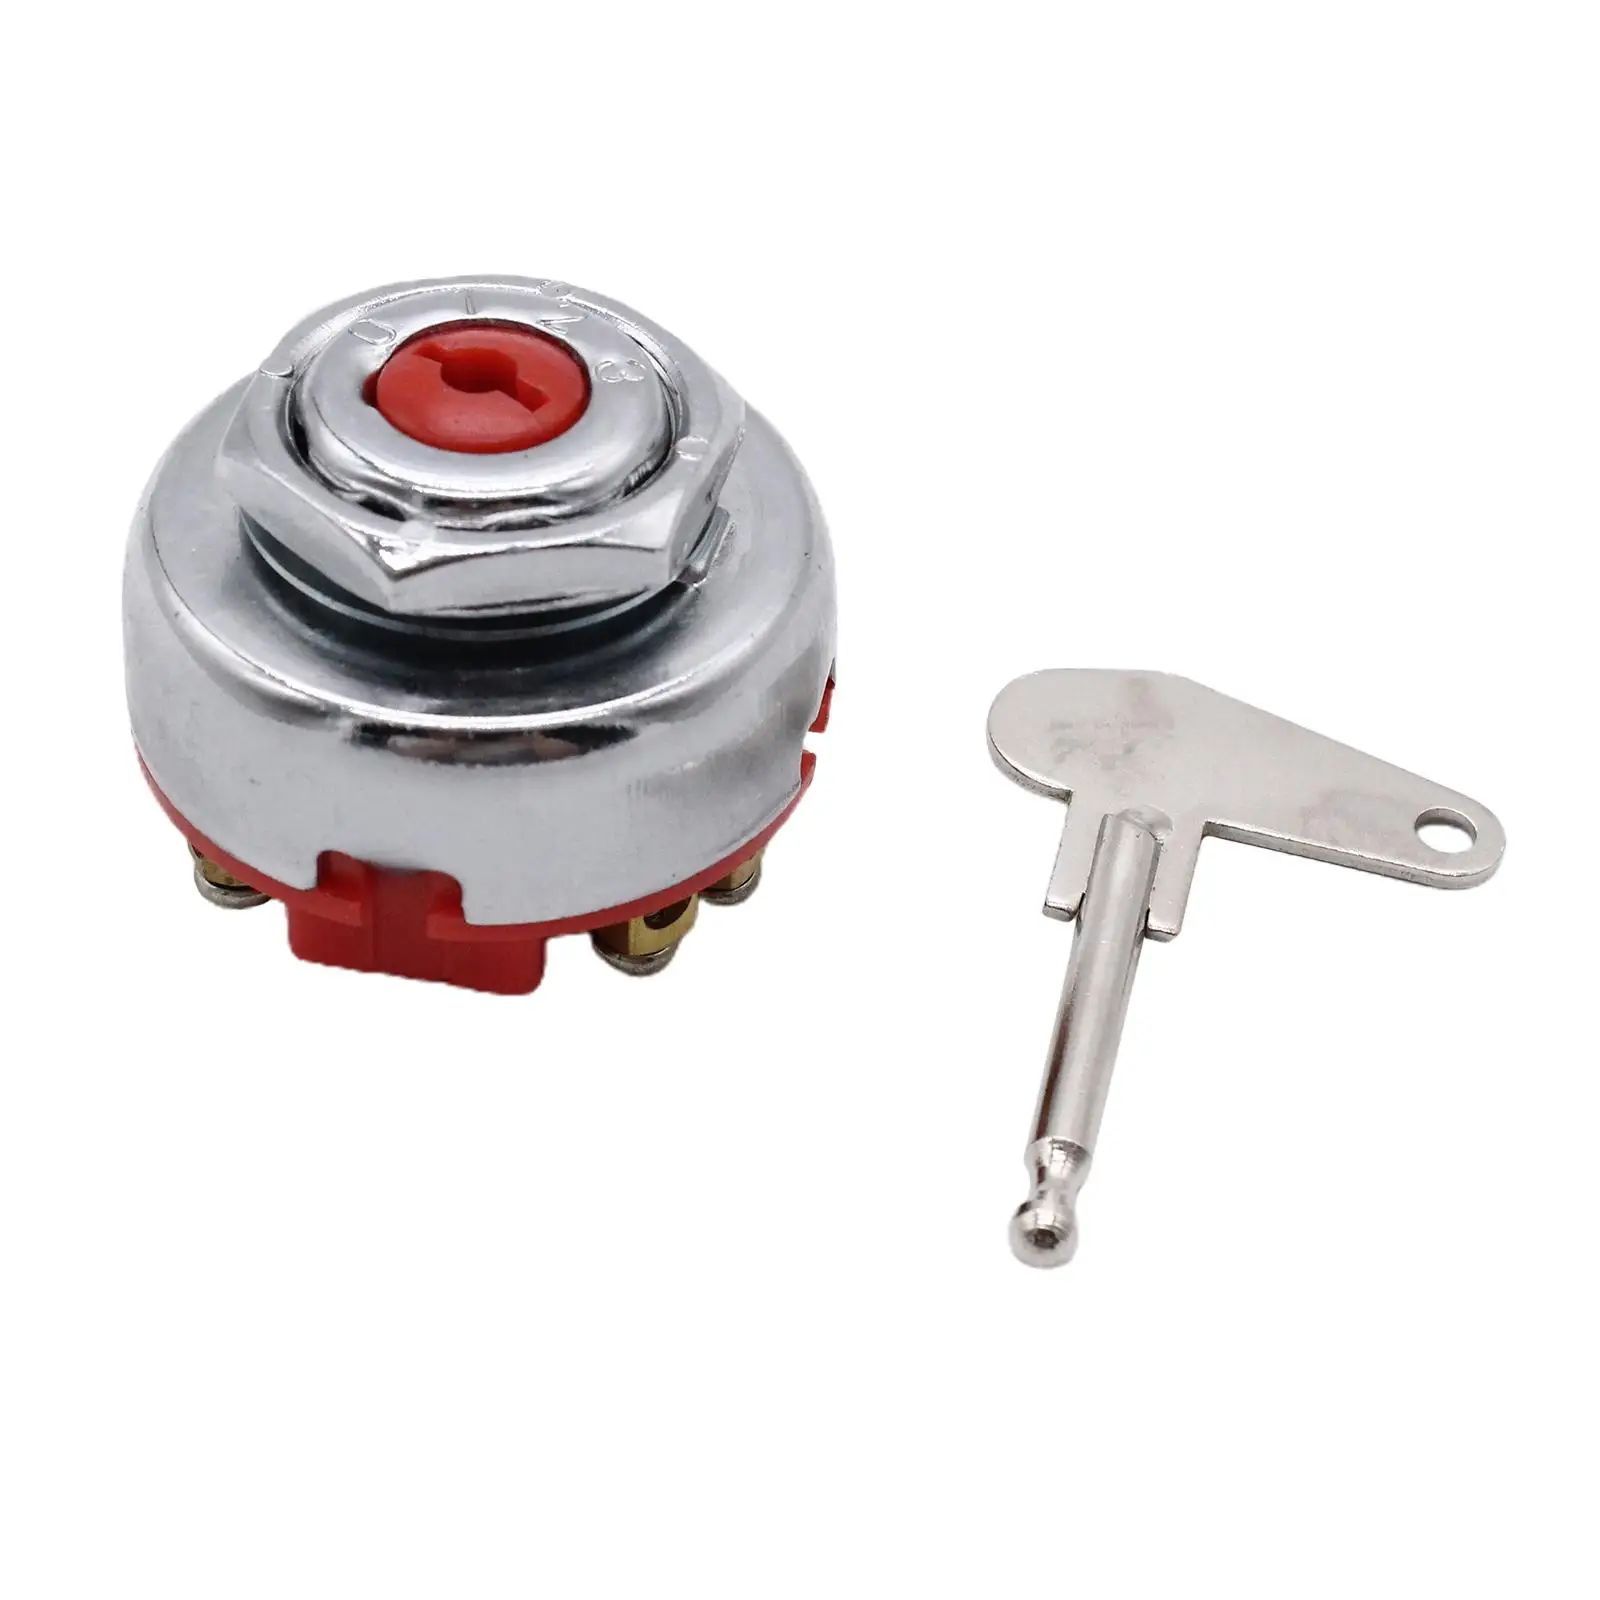 Ignition Switch 8 Pole Repair Part W/Key High Strength for Tractor high strength, sturdy and durable.